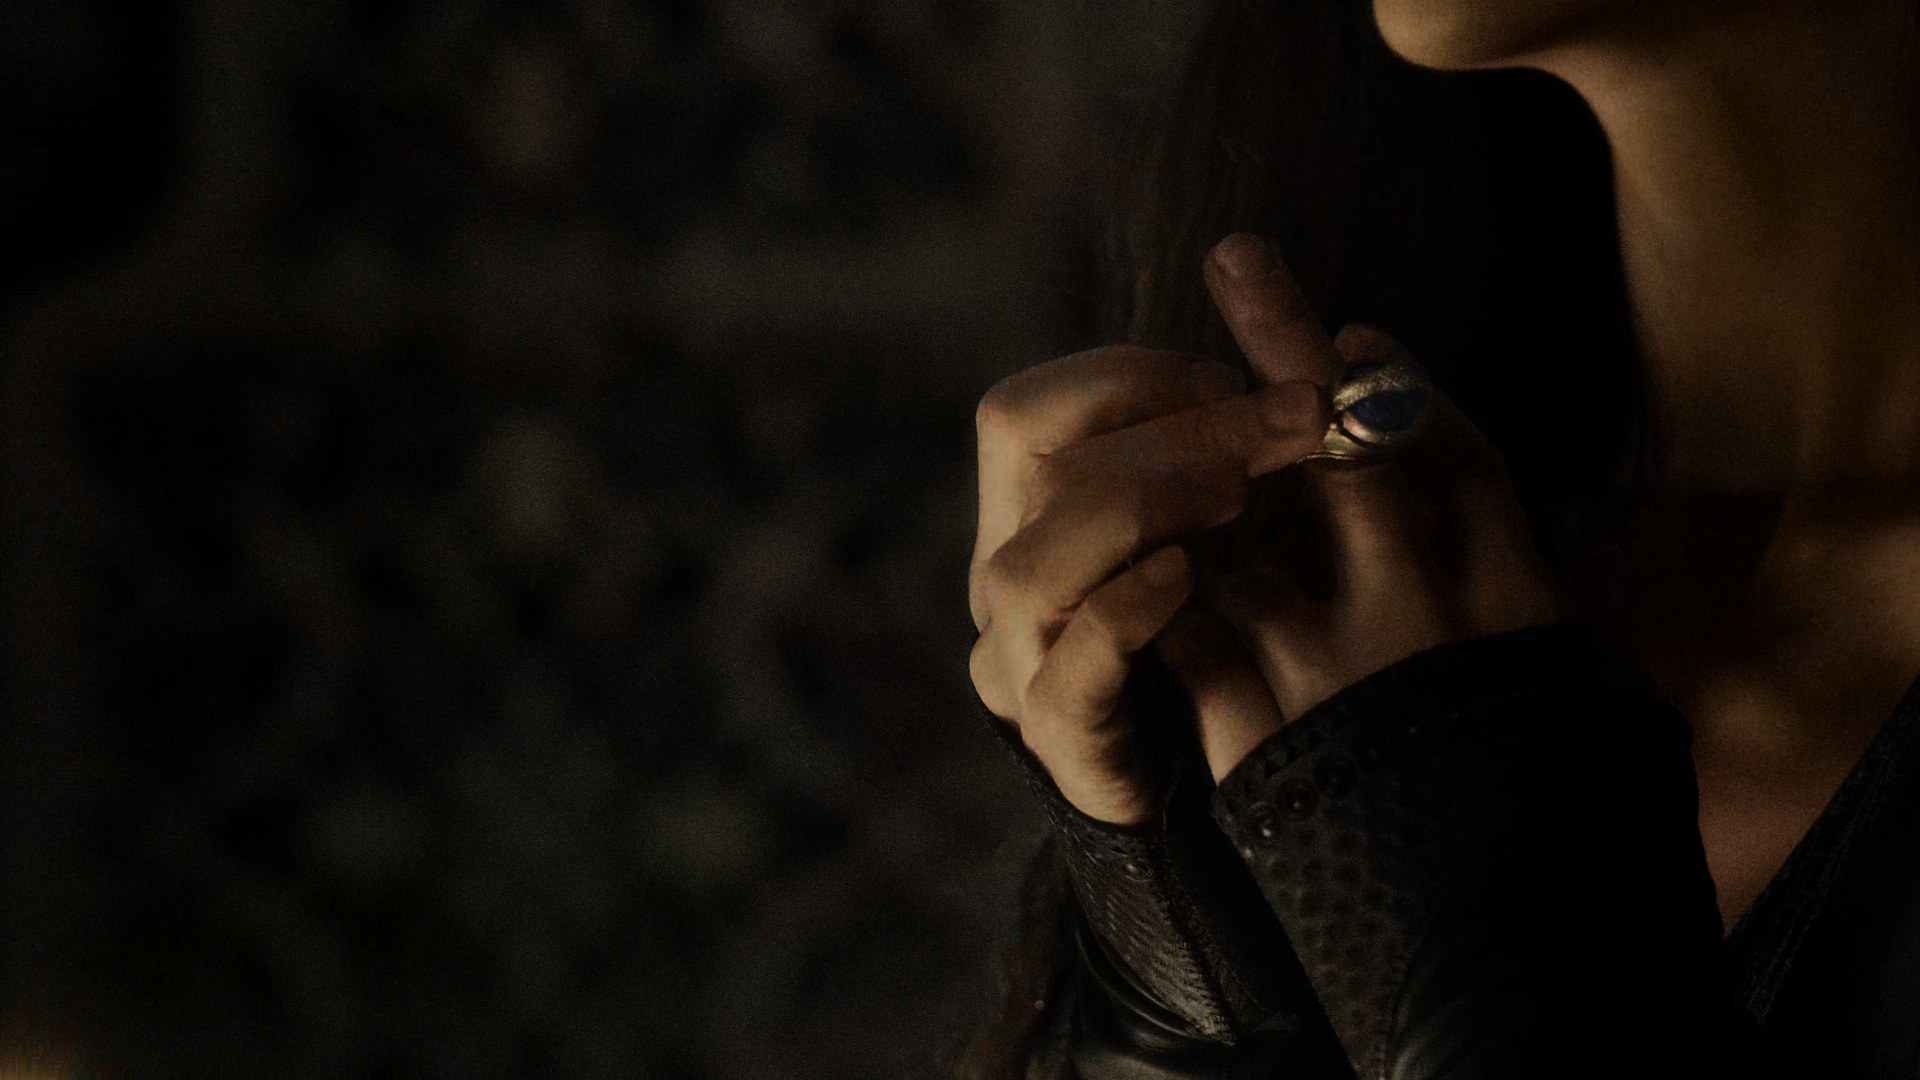 A close-up on Moiraine, focusing on the middle finger of her left hand as she dons her Aes Sedai ring, an oversized golden ring with a large blue gemstone with a serpent eating its own tail surrounding it